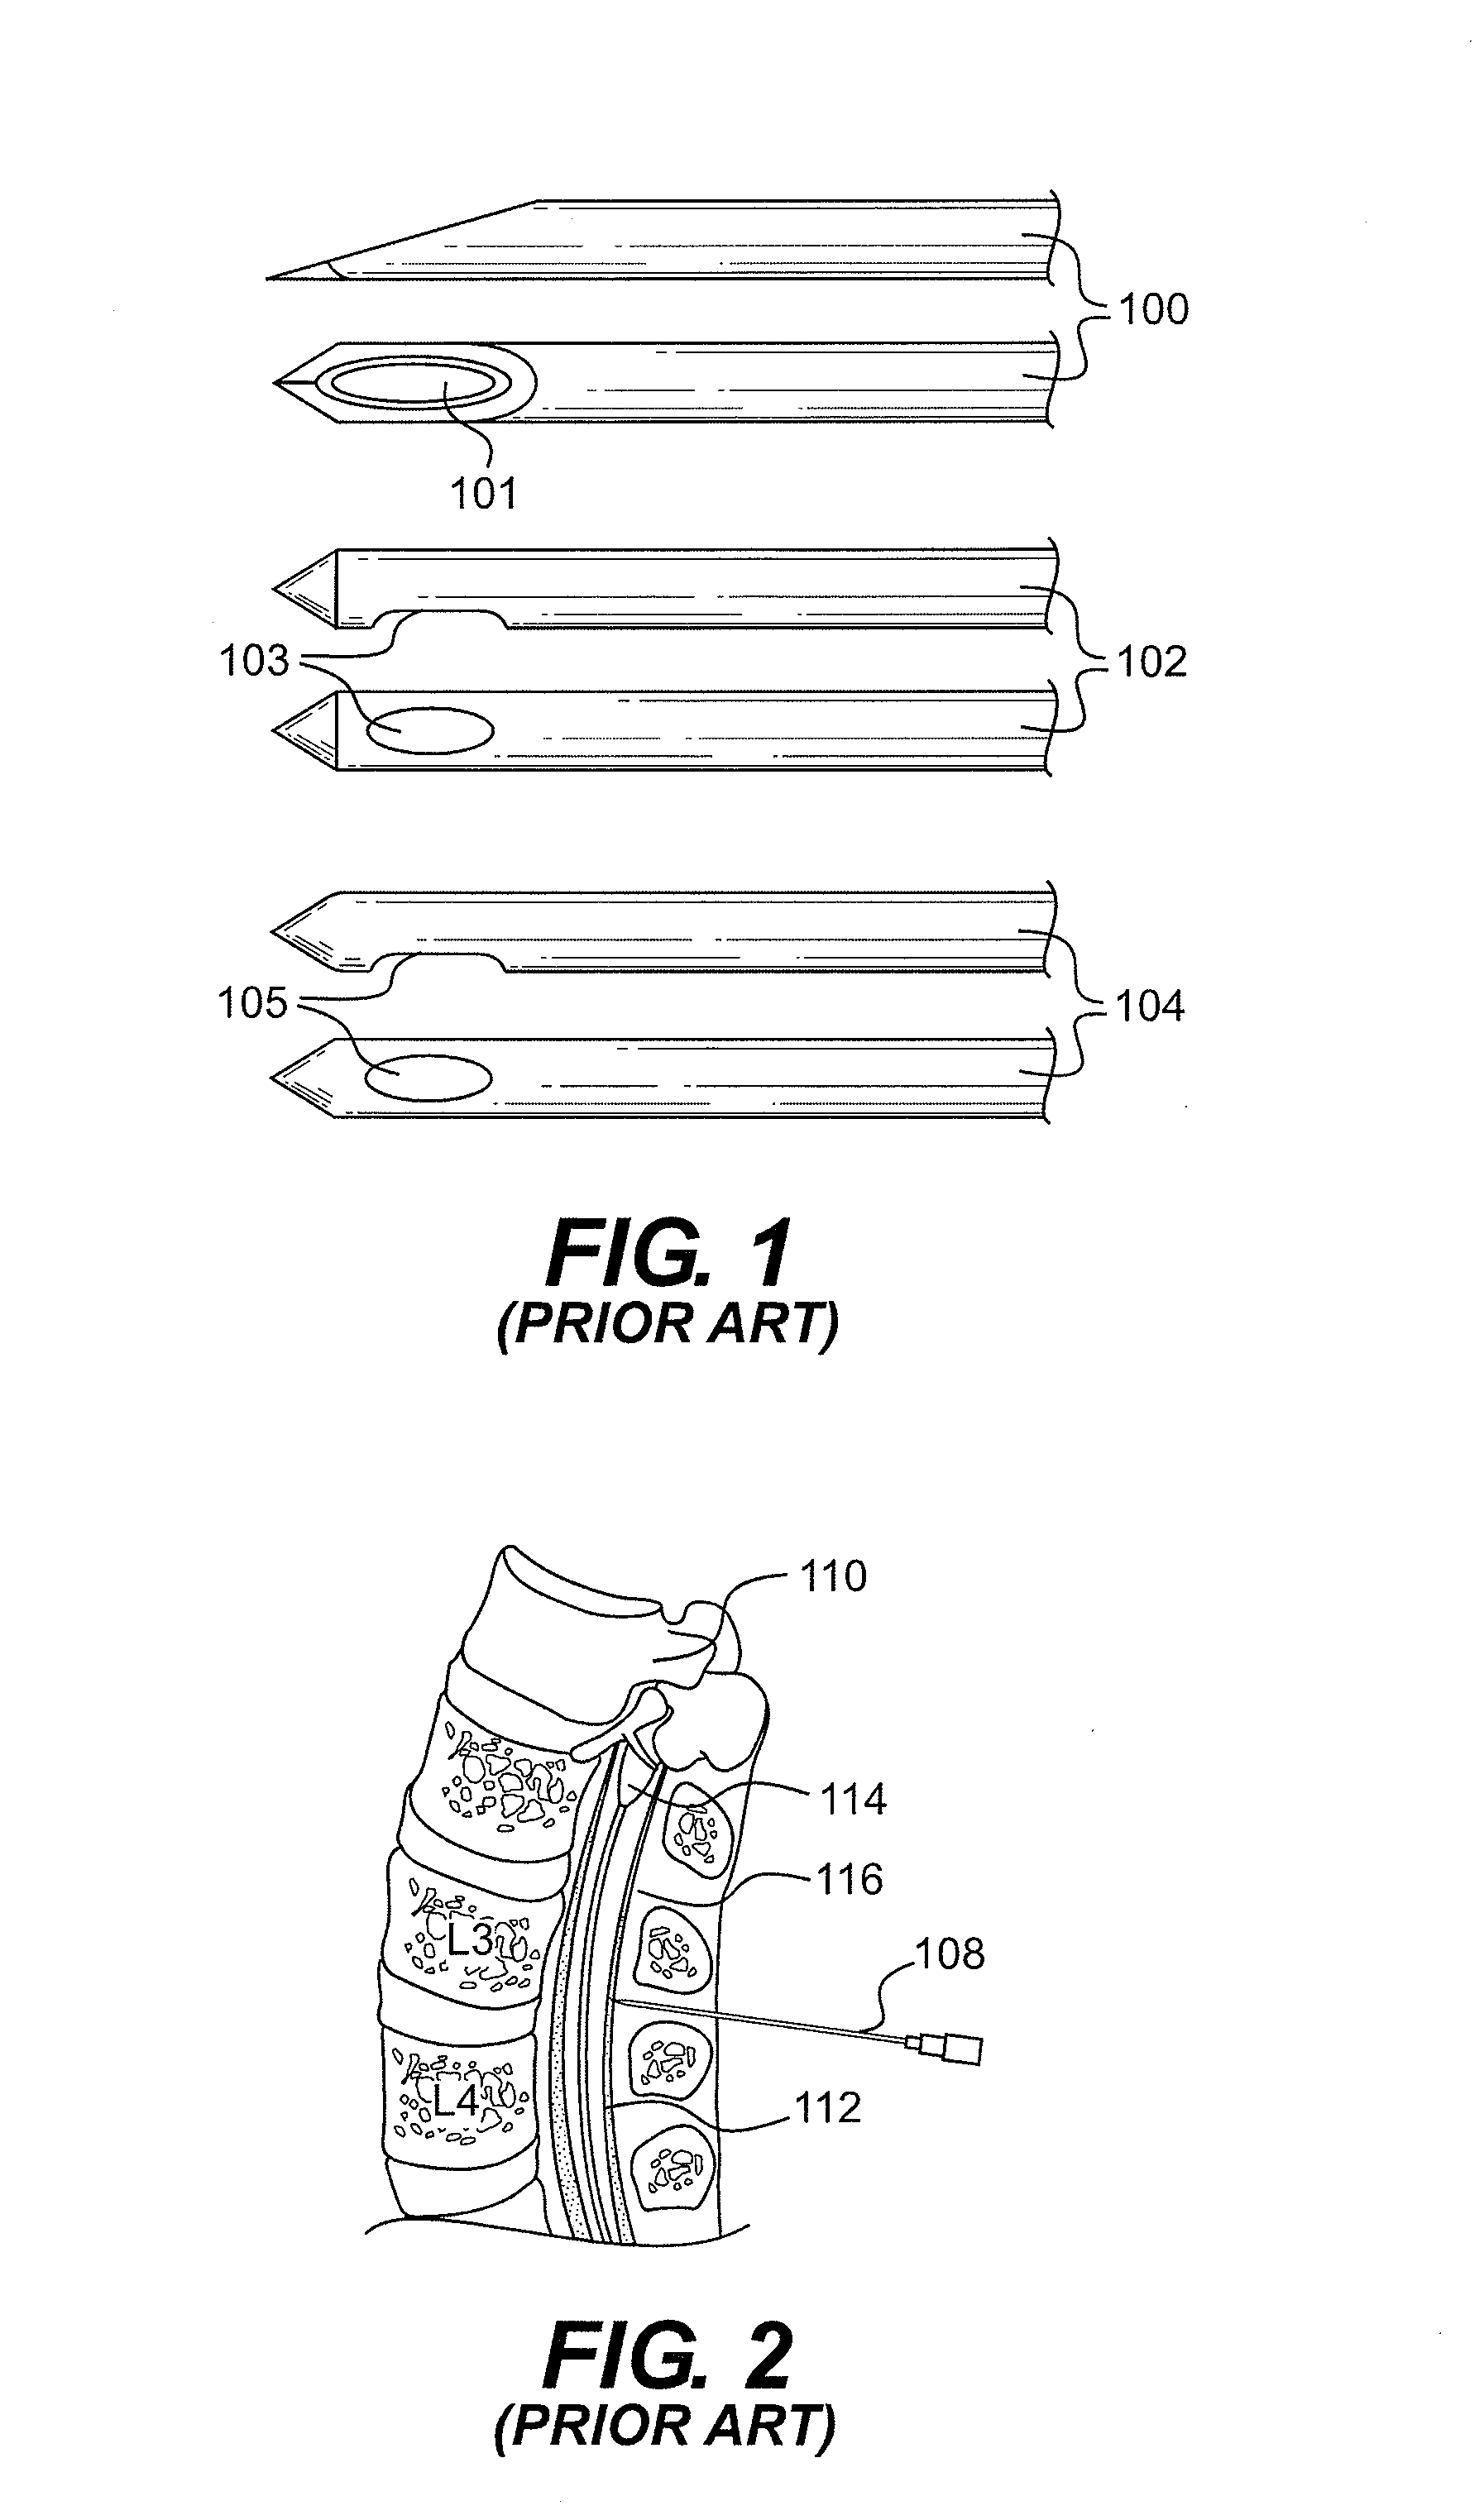 Lumbar puncture detection device